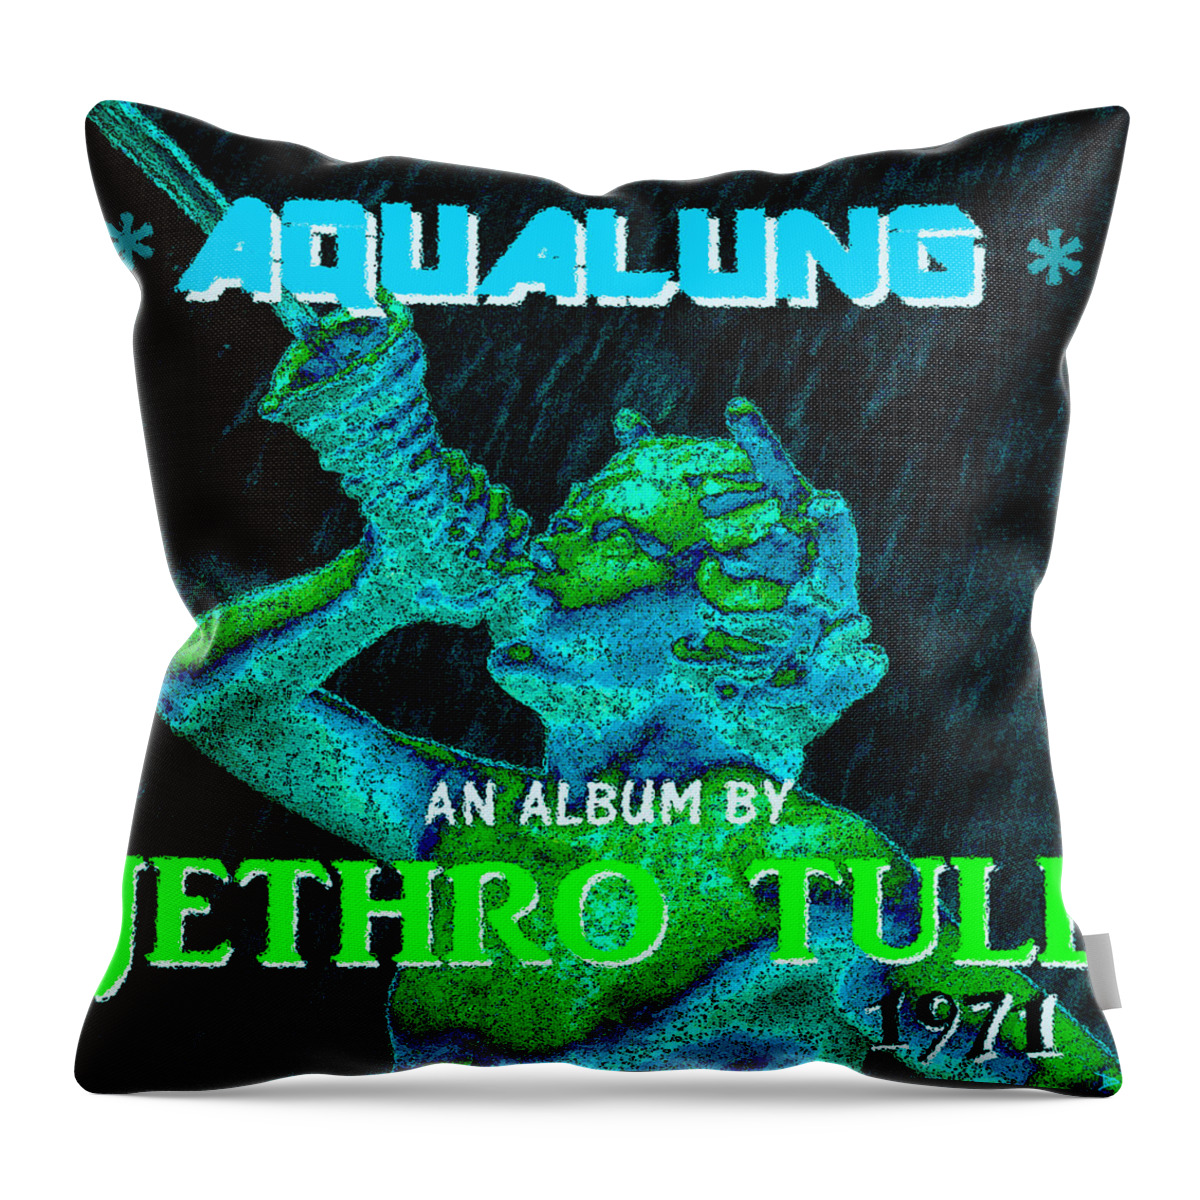 Aqualung Throw Pillow featuring the painting Aqualung 1971 by David Lee Thompson